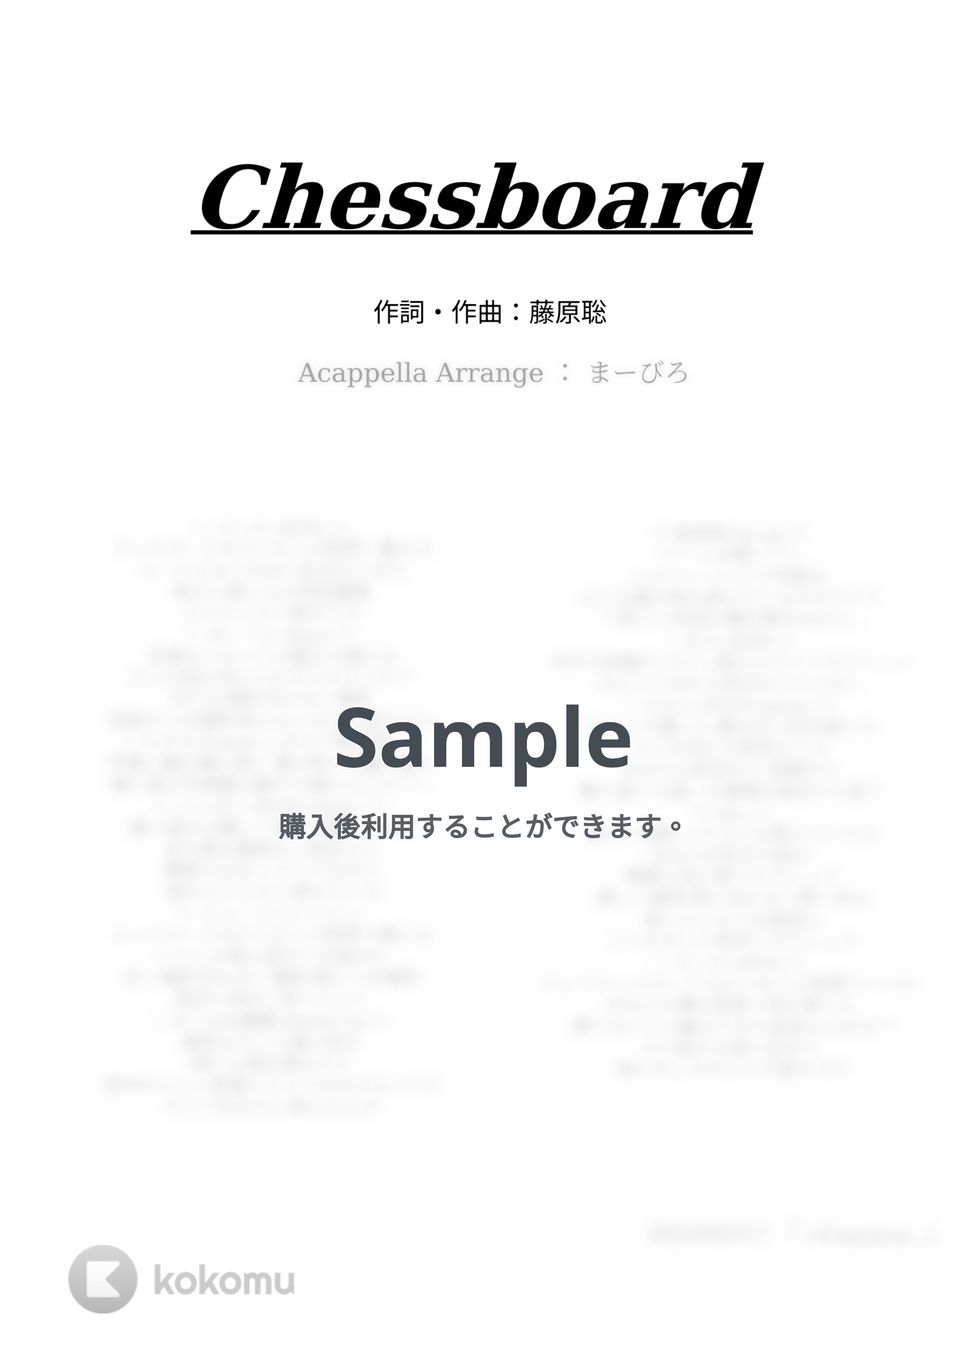 Official髭男dism - Chessboard by まーびーショップ